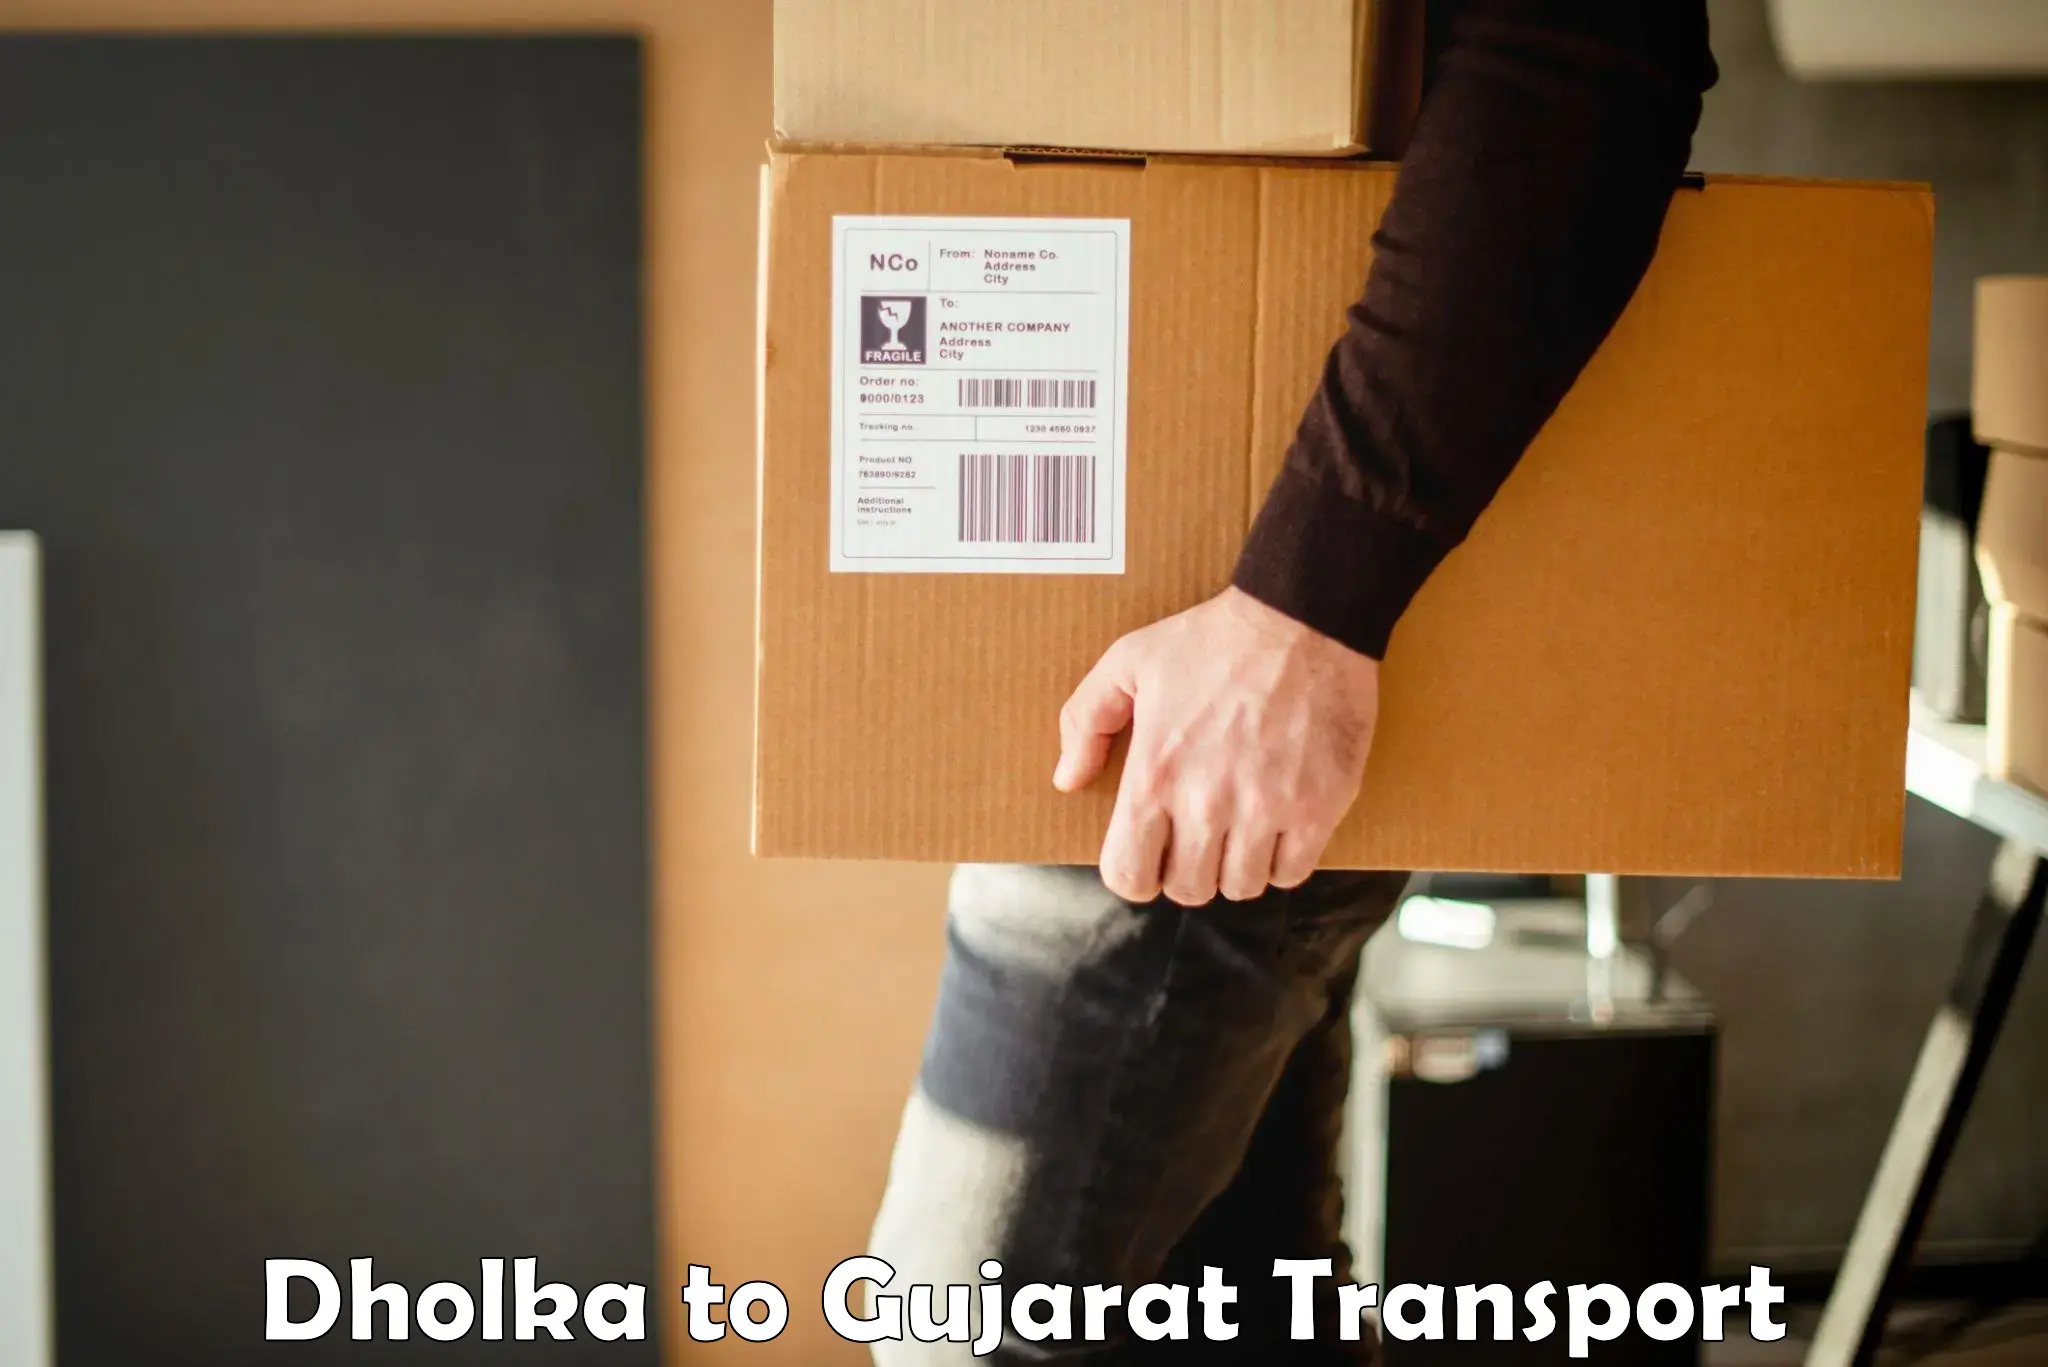 Nearby transport service Dholka to Gujarat